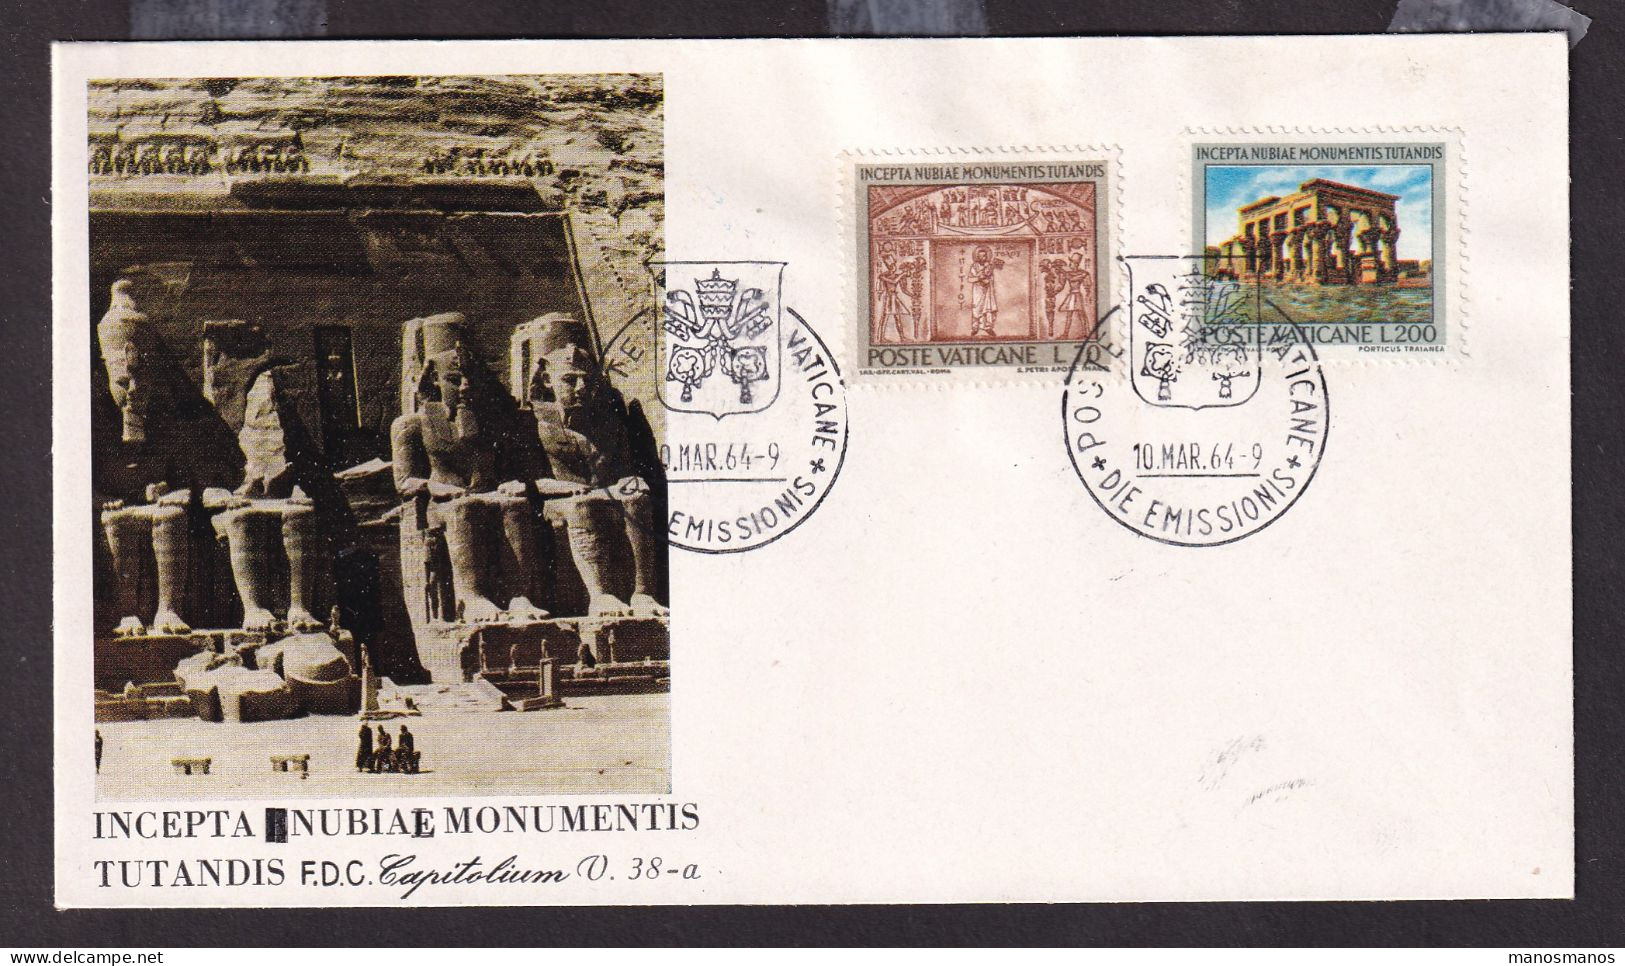 362/31 - EGYPTOLOGY - SAVE THE MONUMENTS OF NUBIA CAMPAIGN - VATICAN F.D.C. 1964 - Archeologie